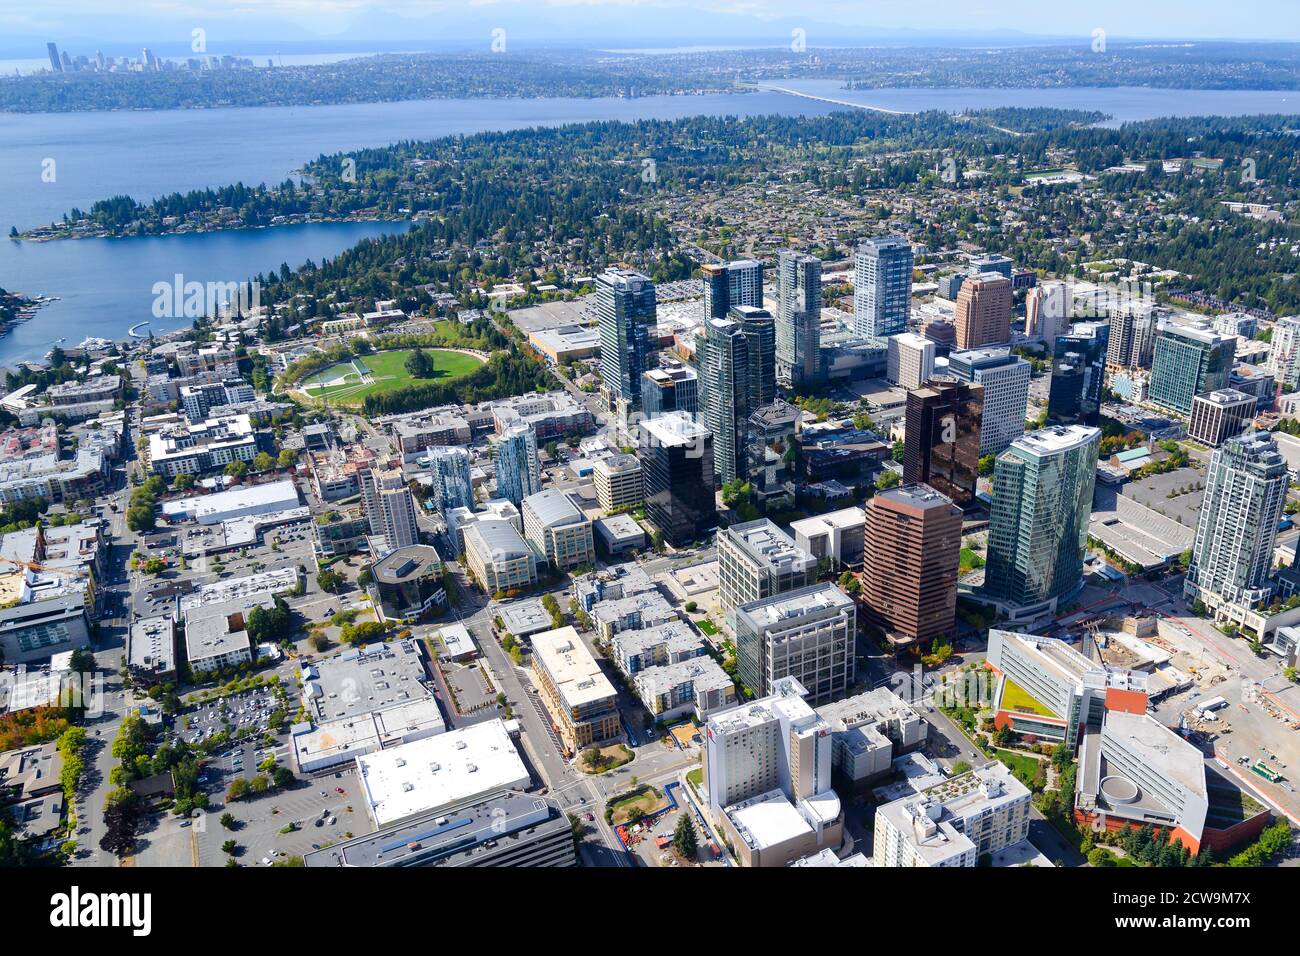 Bellevue downtown aerial view in King County, Washington State, United States. Lake Washington and Seattle behind. Stock Photo